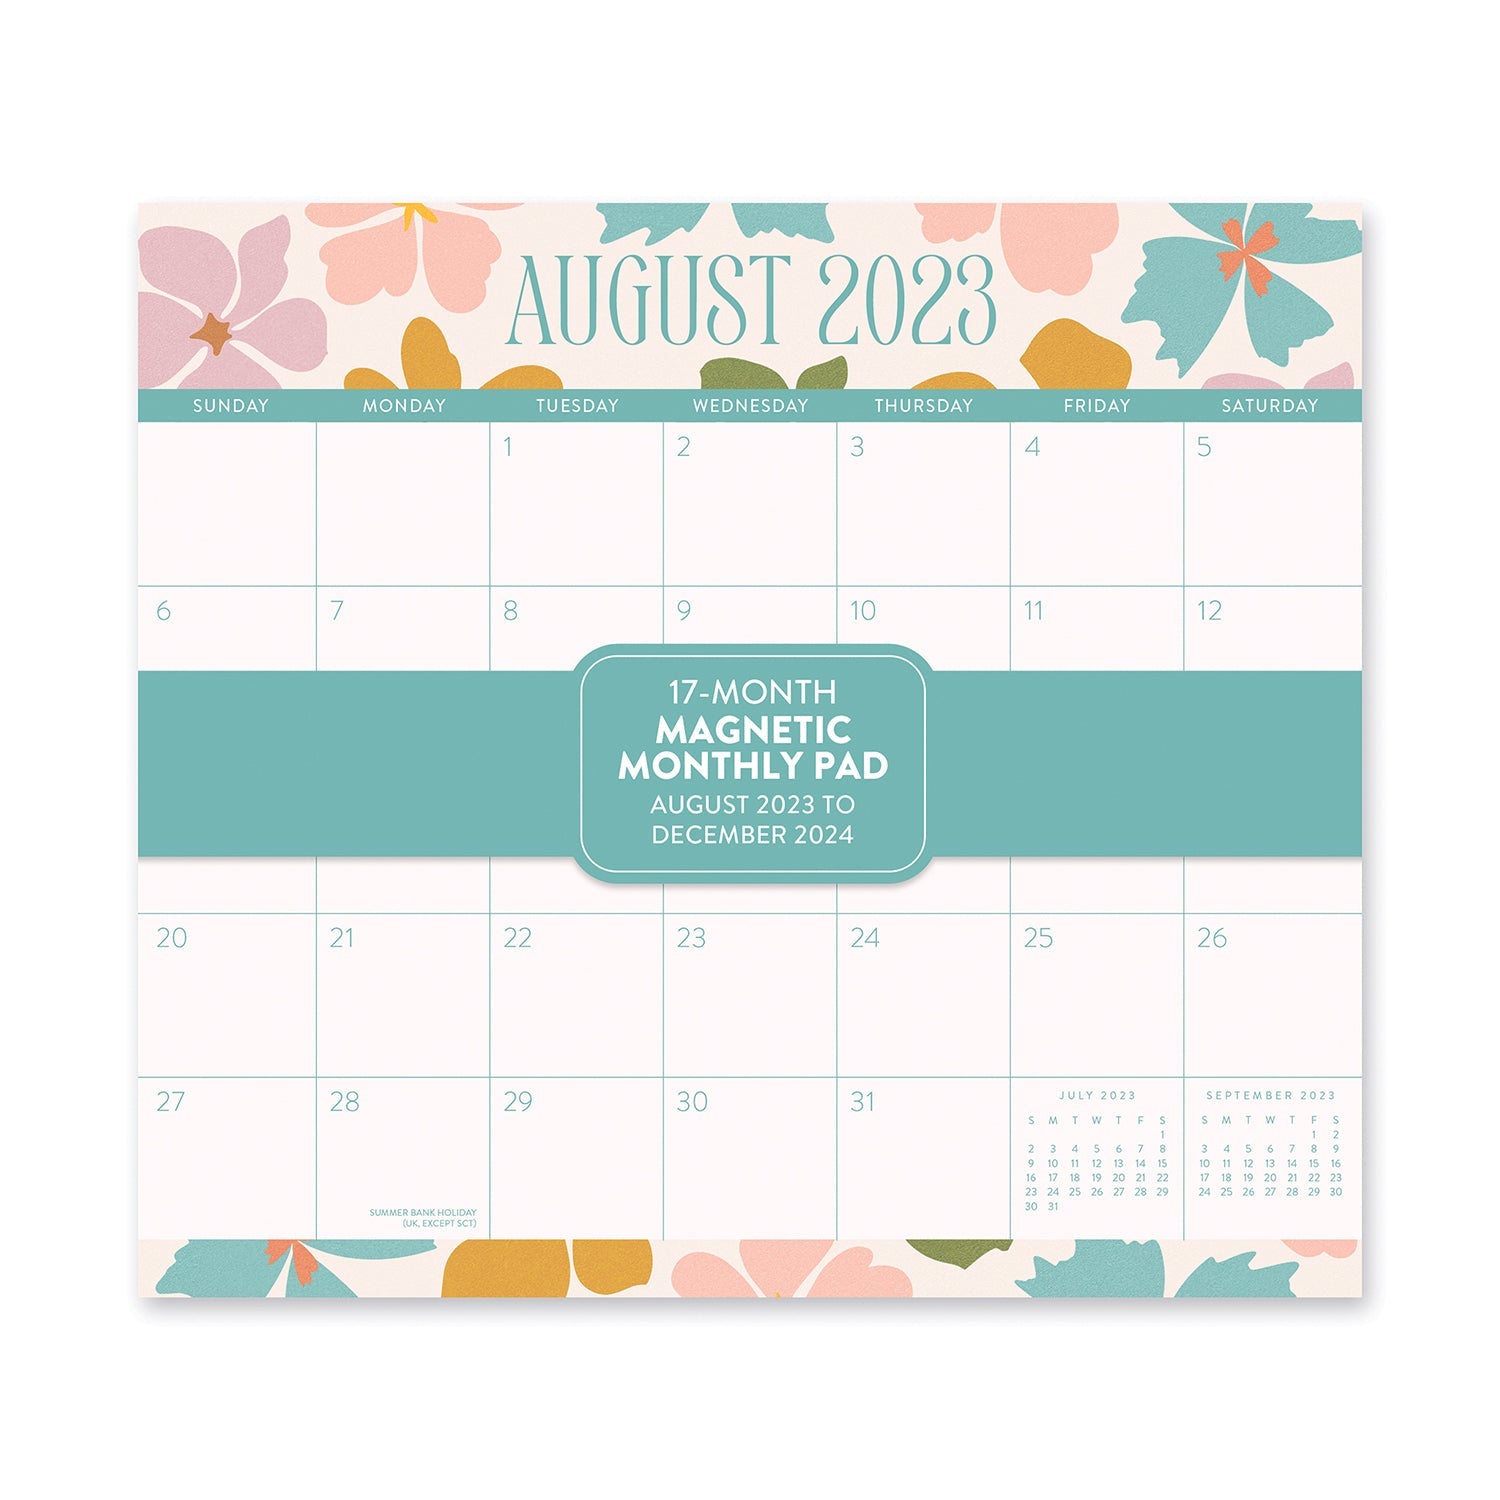 Weekly Planner/Calendar 2024 with magnets for the fridge